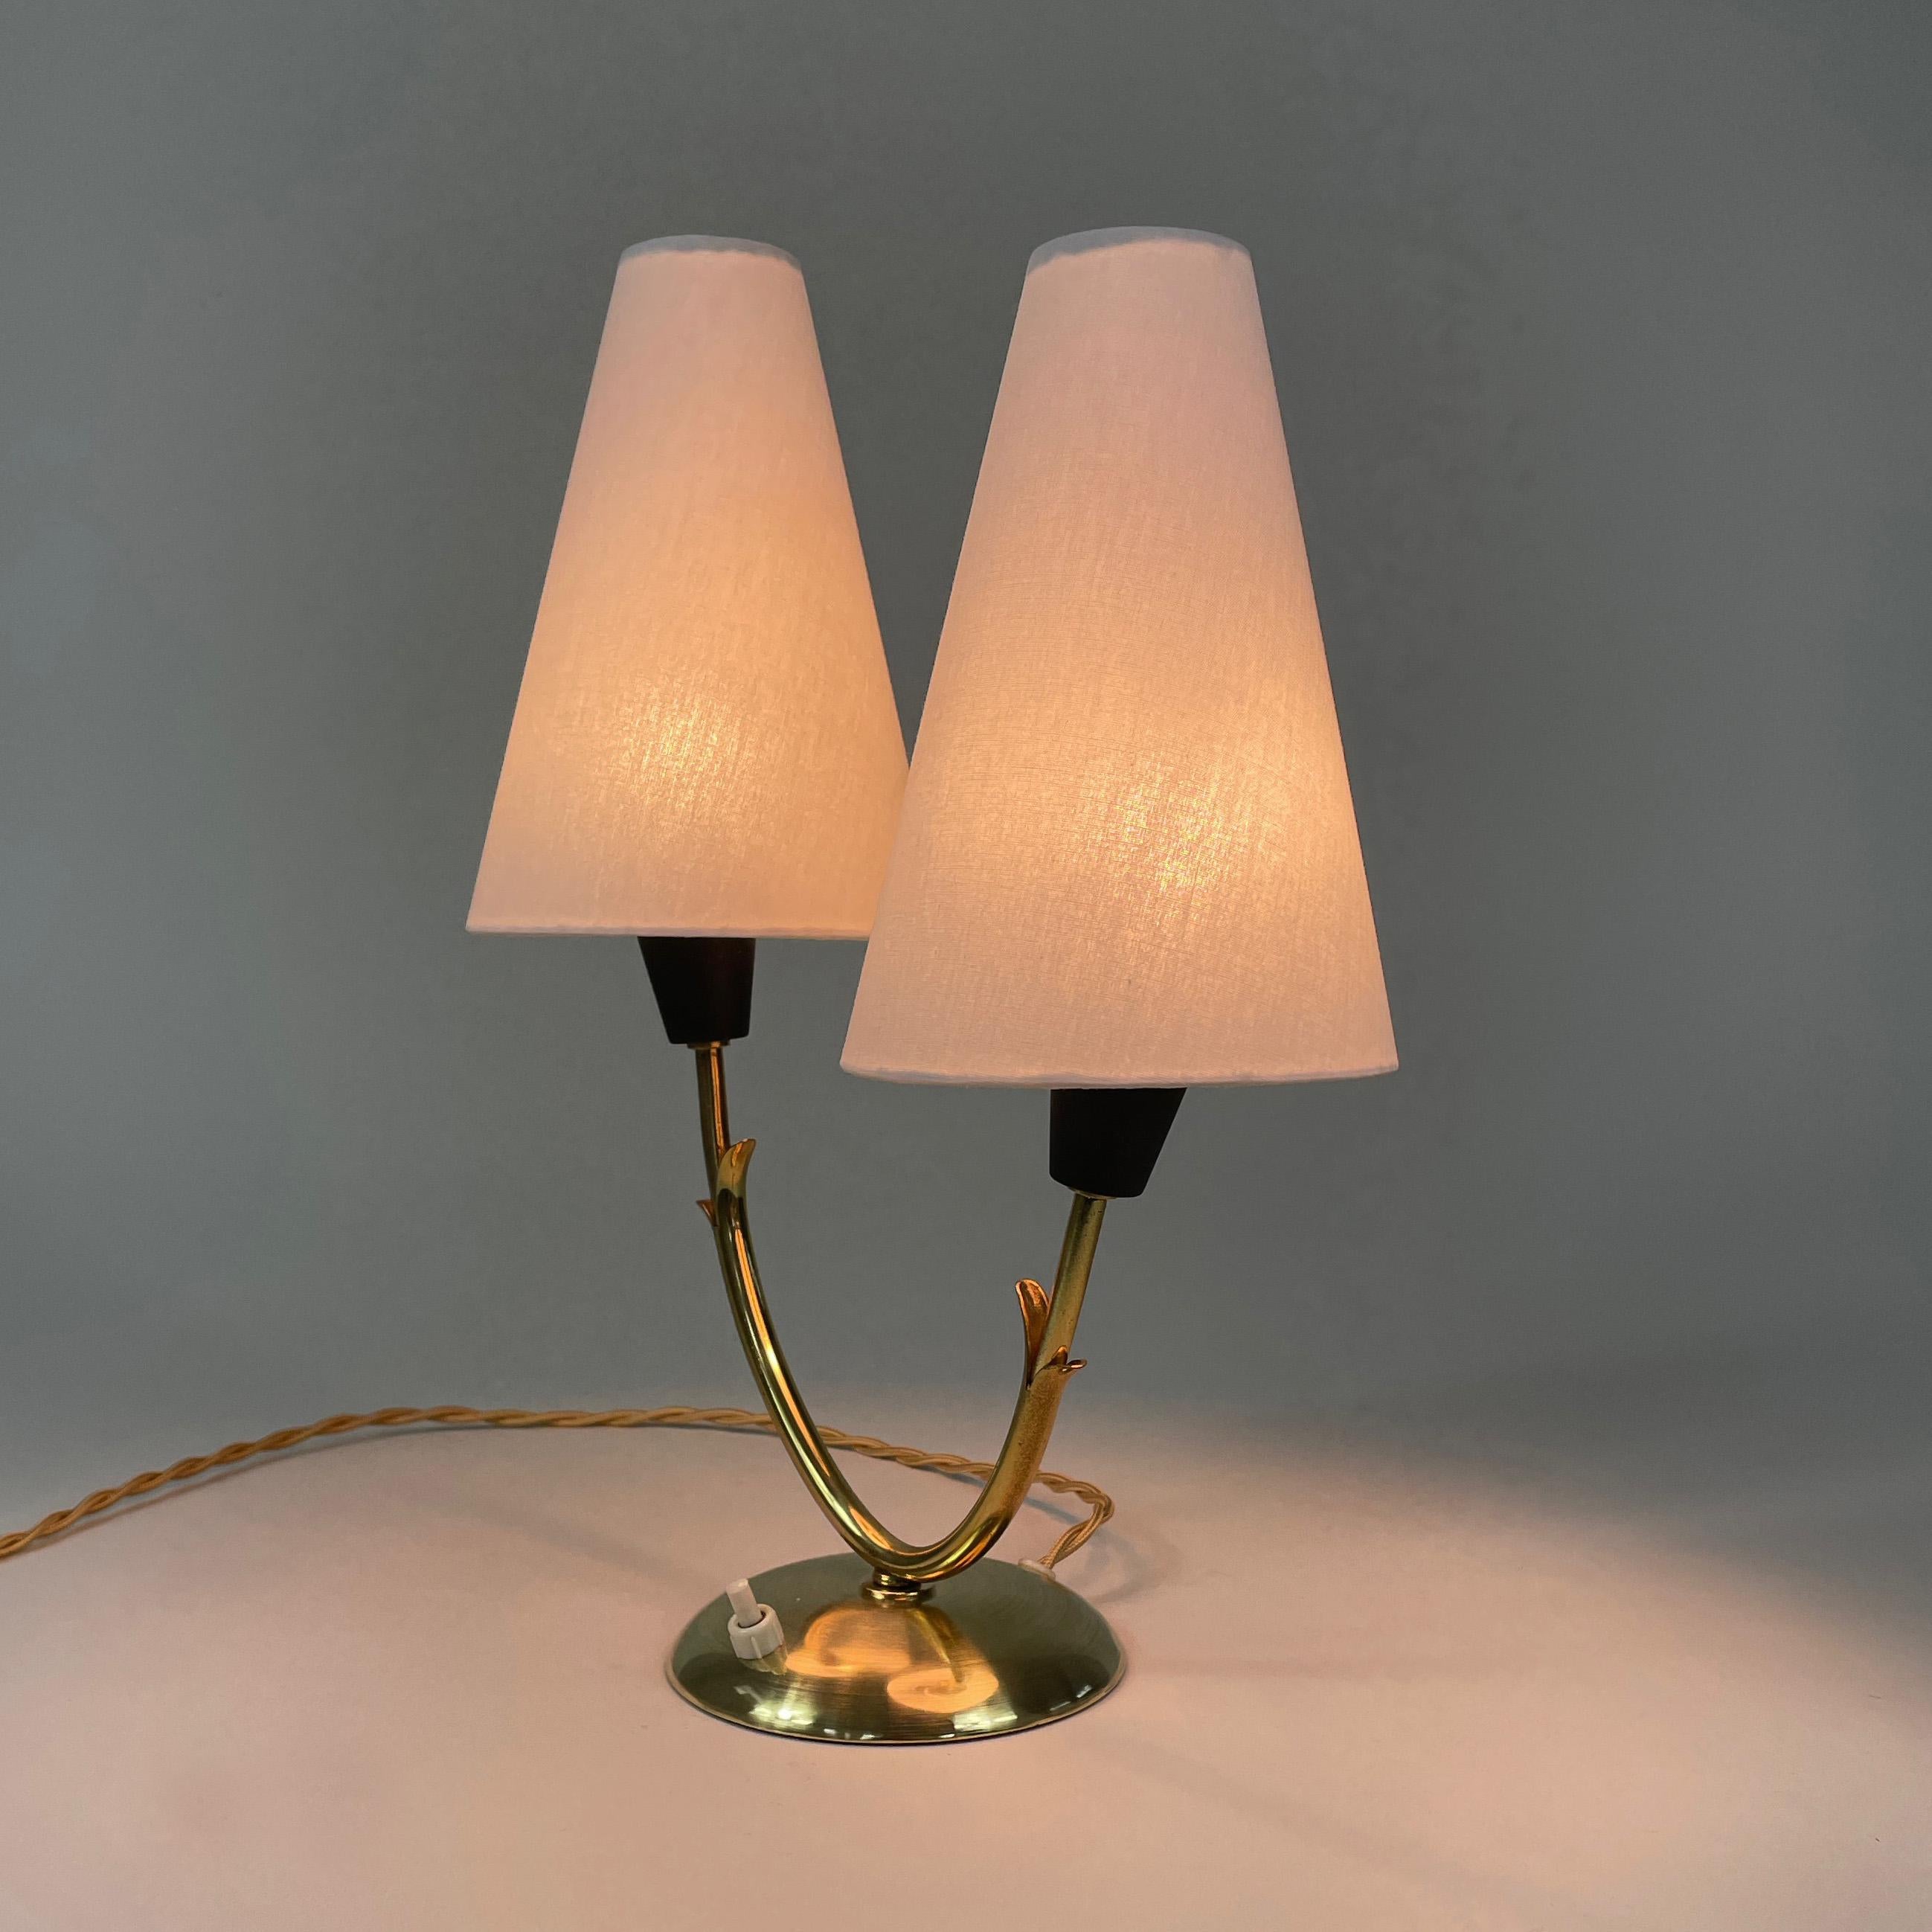 Fabric Double Arm Brass Table Lamp, Sweden 1950s For Sale